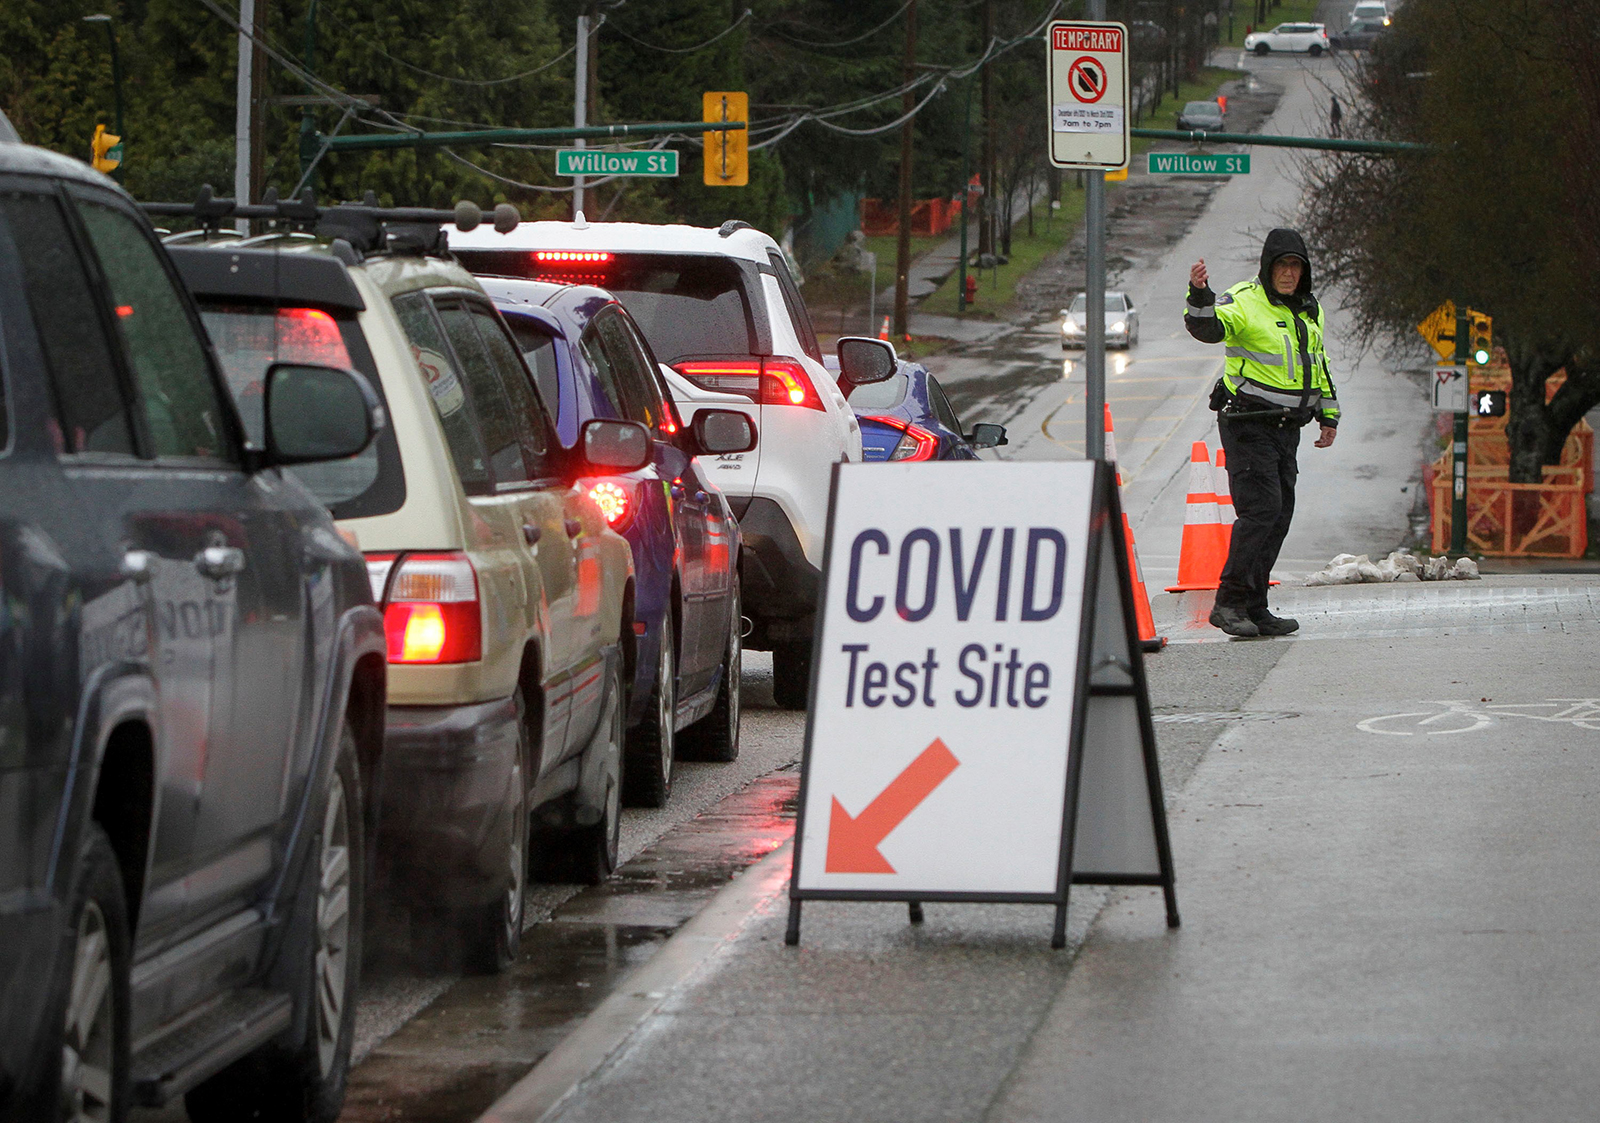 A police officer directs the traffic outside a Covid-19 test site in Vancouver, British Columbia, Canada, on Dec. 18.